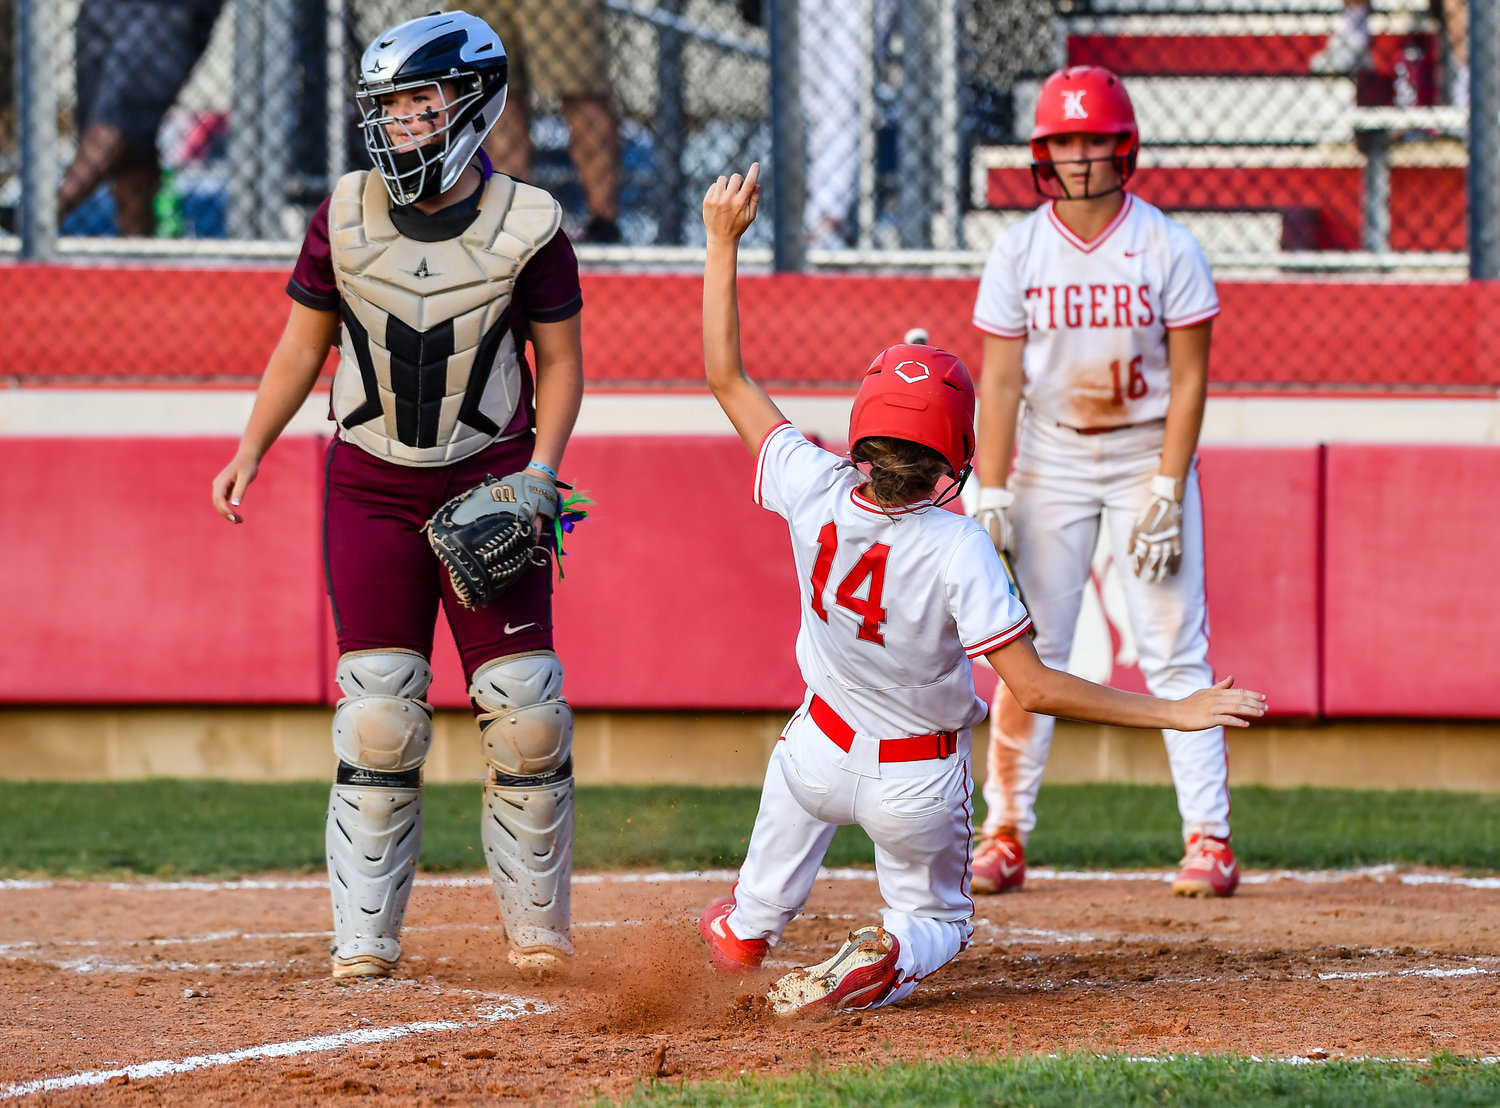 May 13, 2022: Katy's Haley Lance #14 slides safely into home plate during Regional Quarterfinal playoff between Katy and Cinco Ranch at Katy HS. (Photo by Mark Goodman / Katy Times)